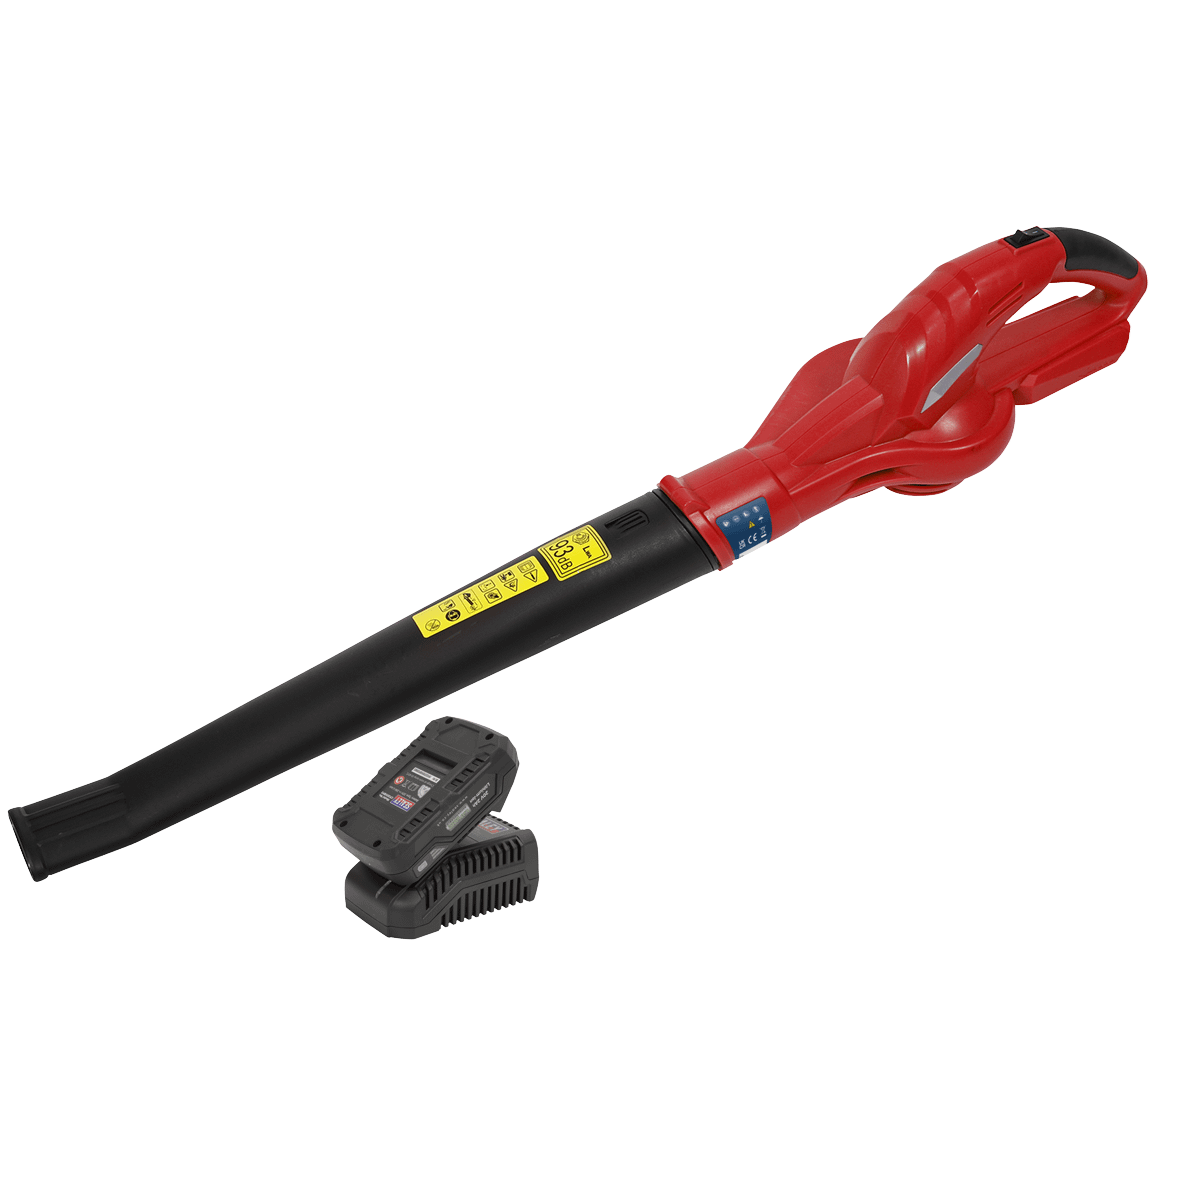 Sealey Cordless Leaf Blower Combo 20V Series